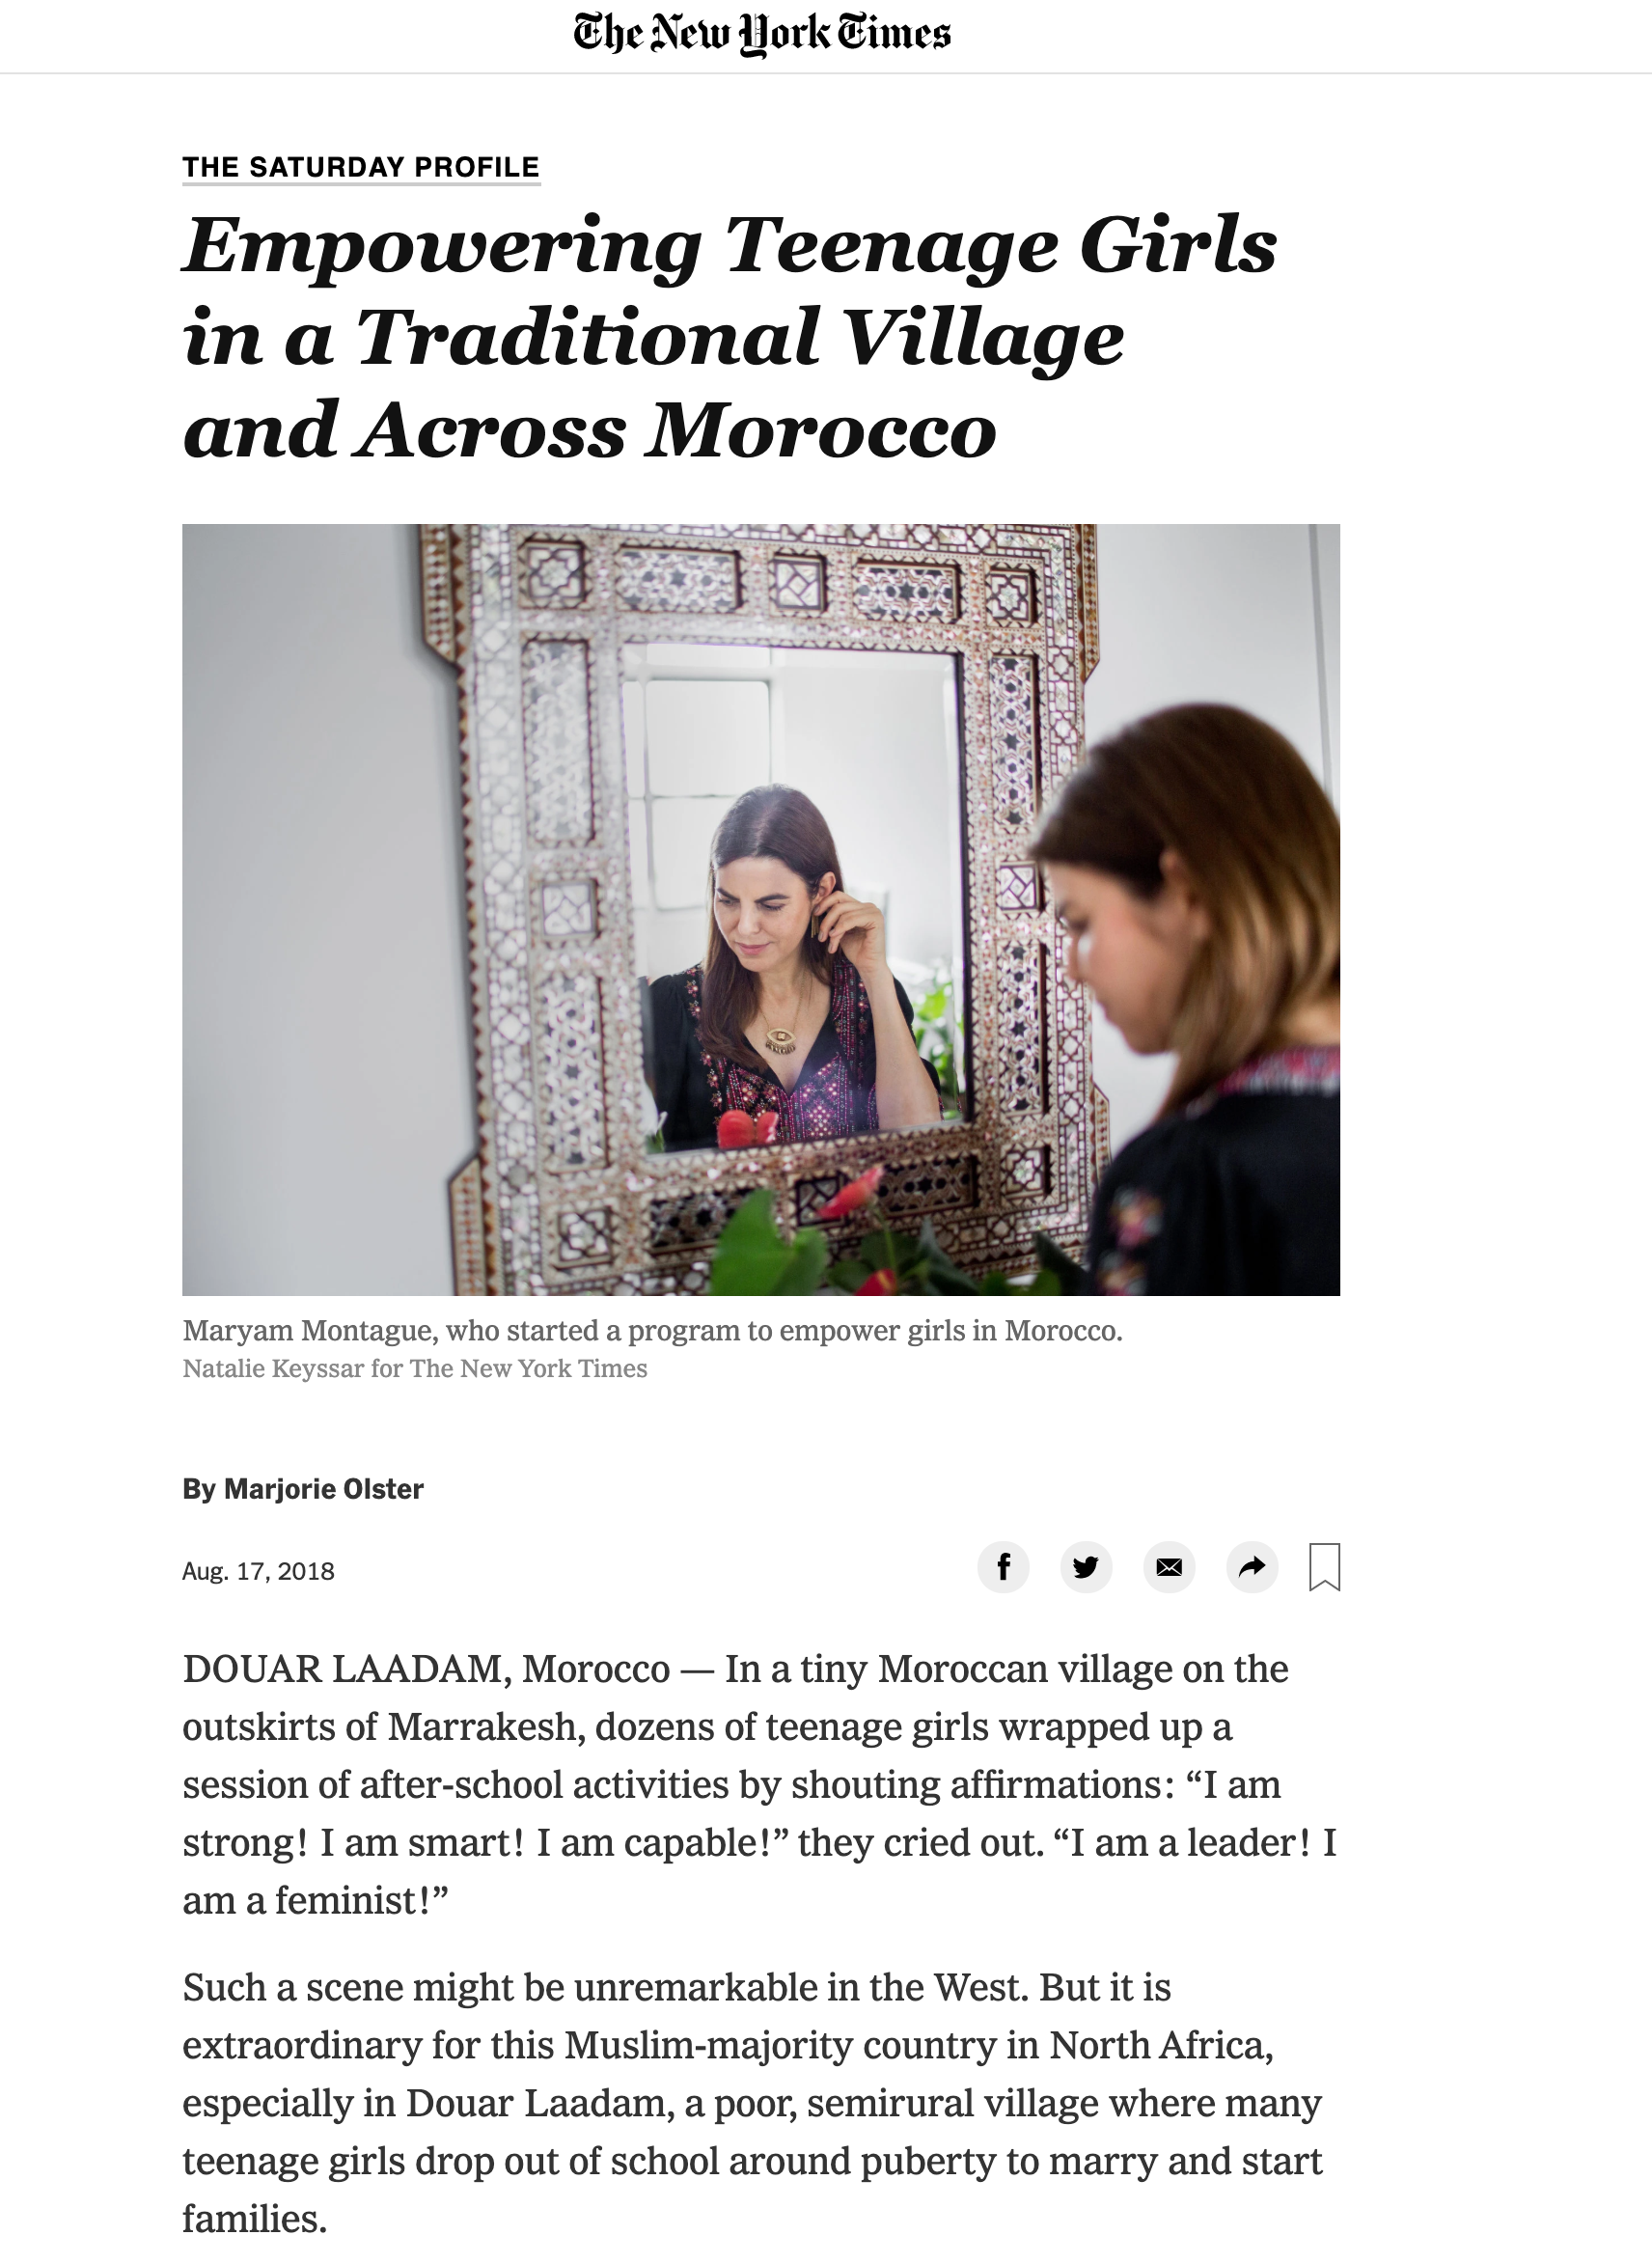 Empowering Teenage Girls in a Traditional Village and Across Morocco - The New York Times.png